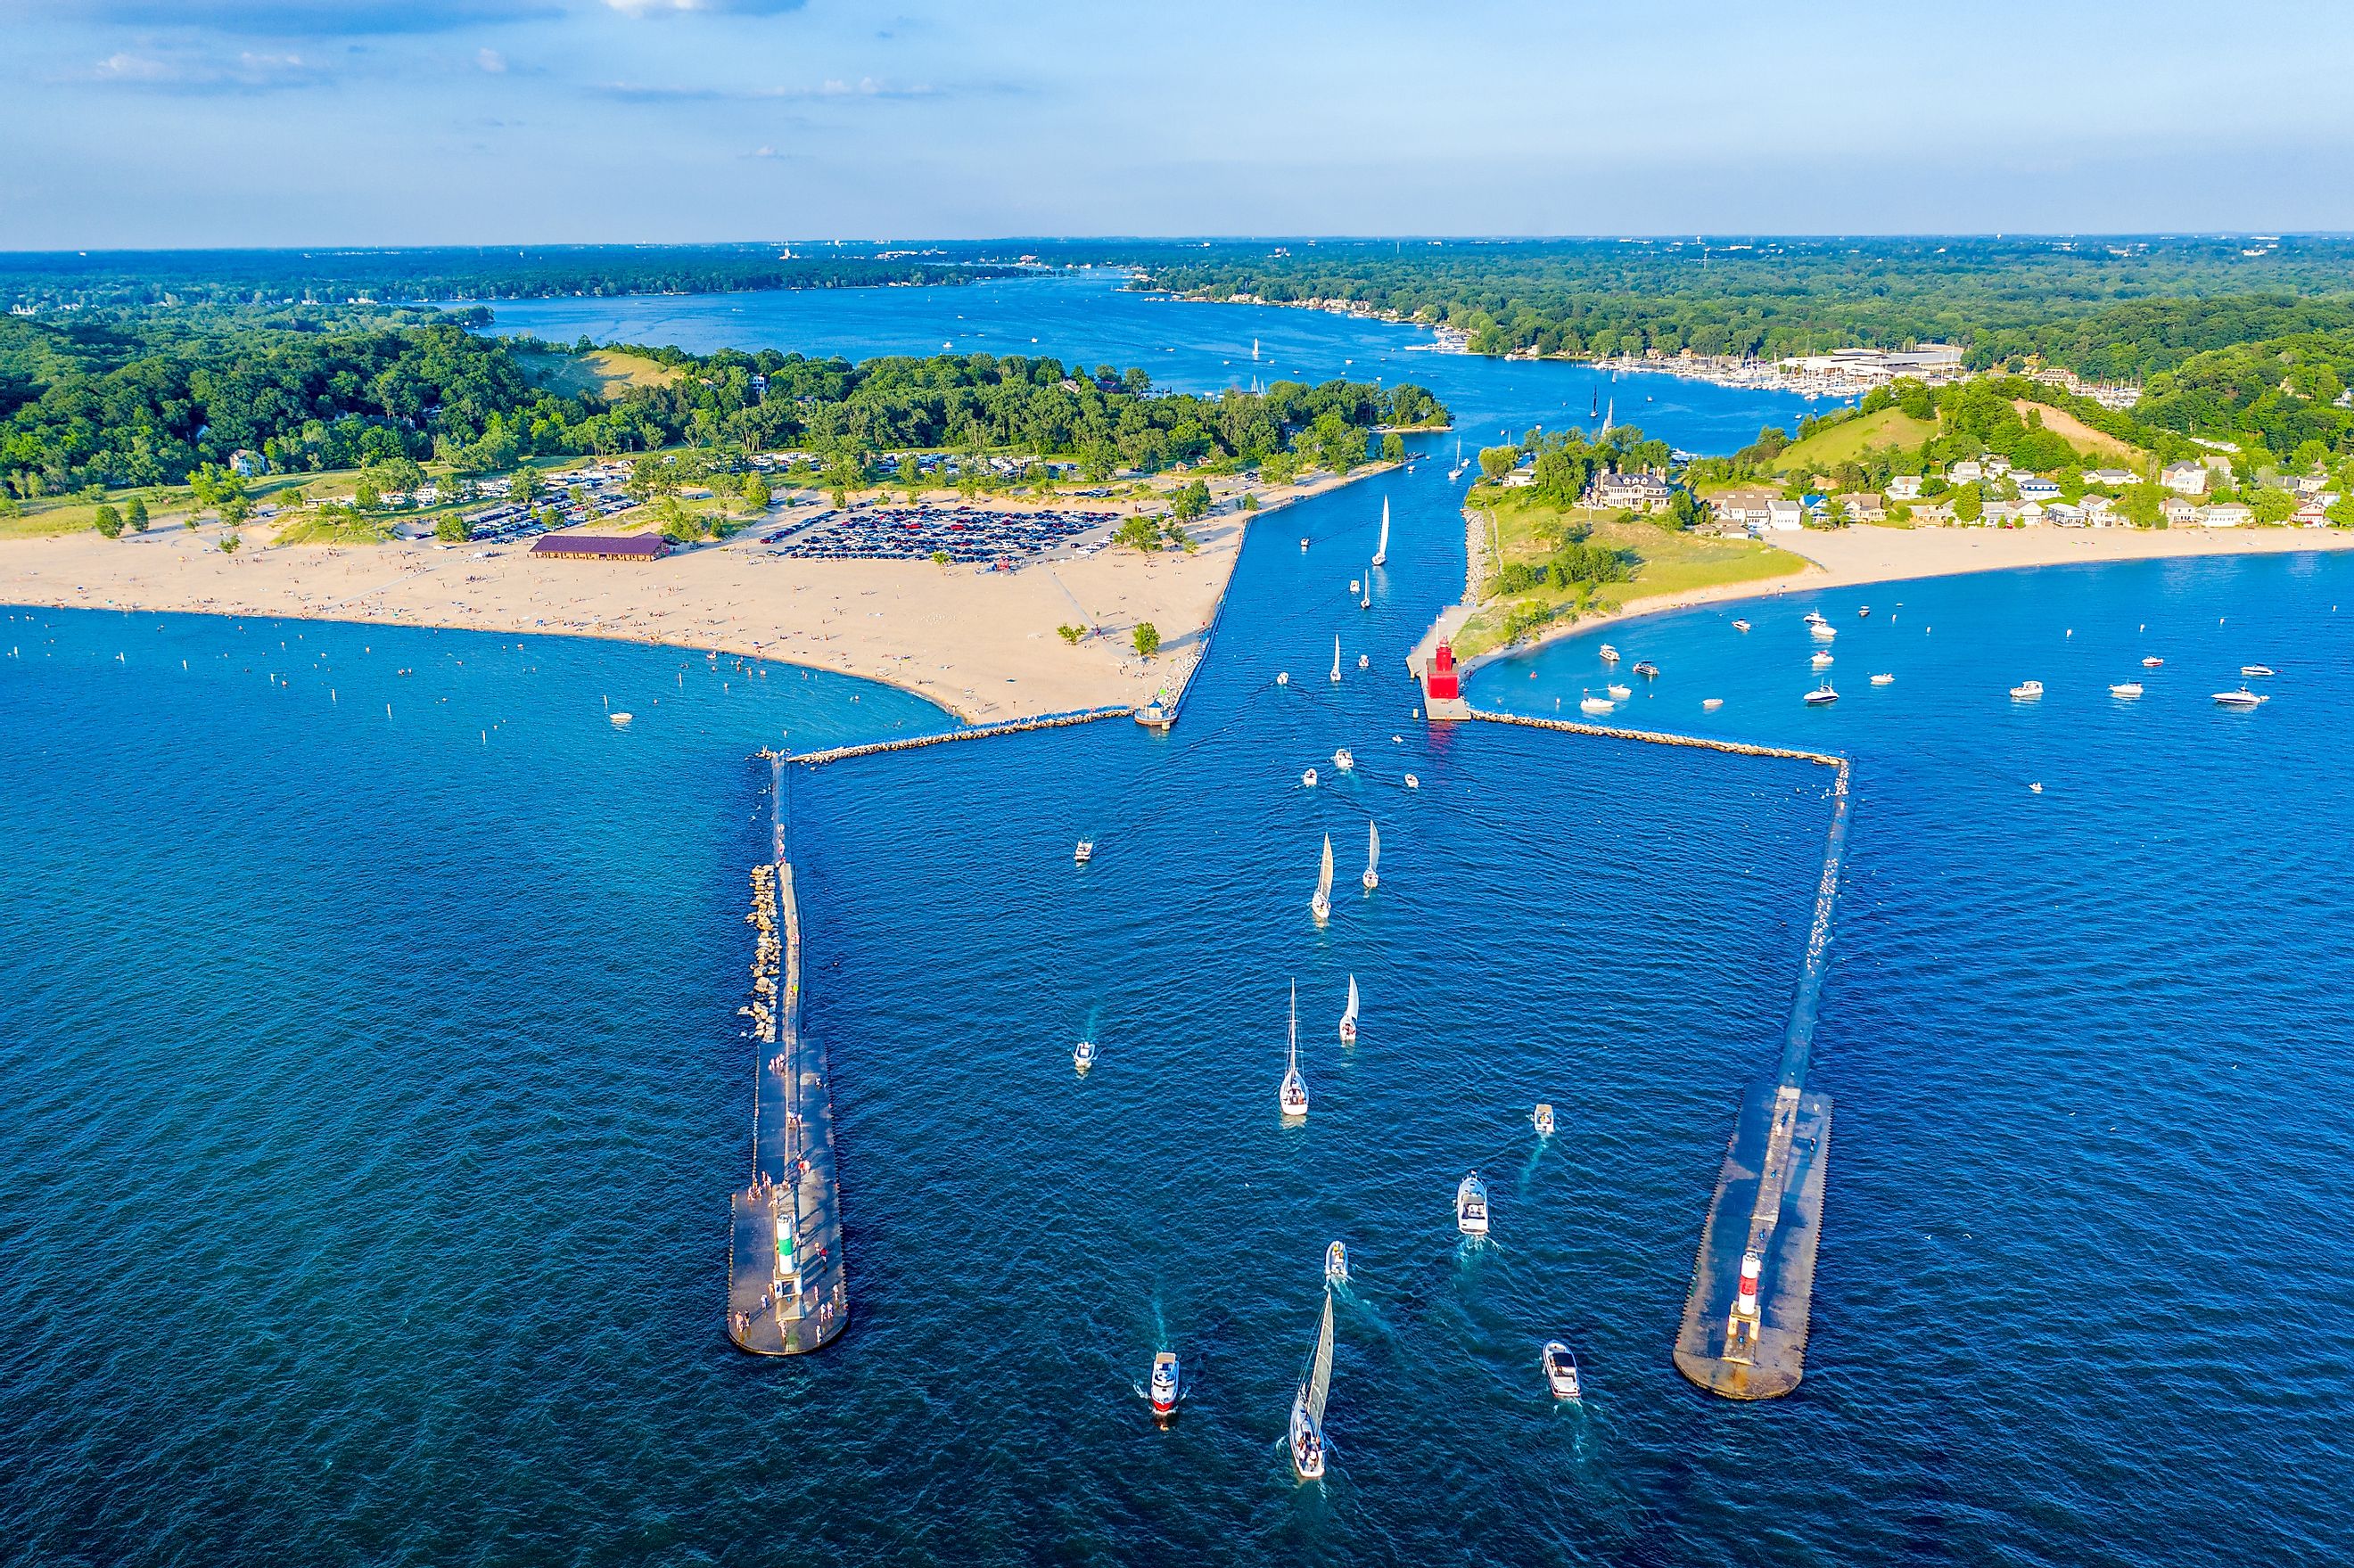 Aerial view of the Holland Harbor Lighthouse at the channel connecting Lake Macatawa with Lake Michigan in Holland State Park, Michigan.